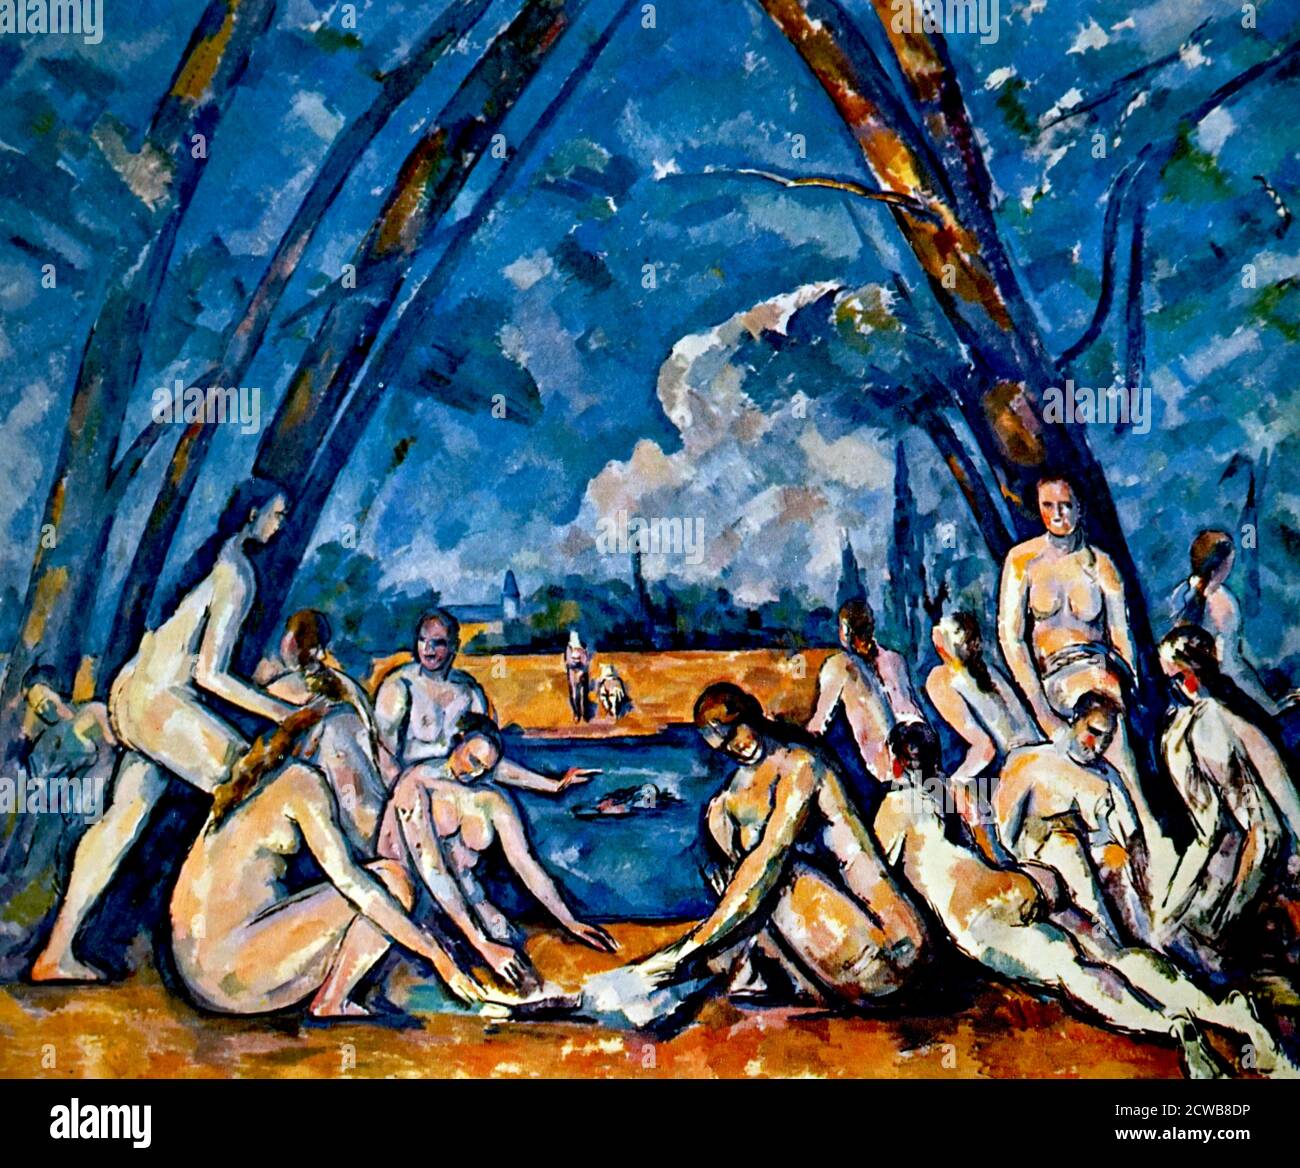 Painting titled 'The Large Bathers' by Paul Cezanne. Cezanne (1839-1906) a French artist and post-impressionist painter Stock Photo